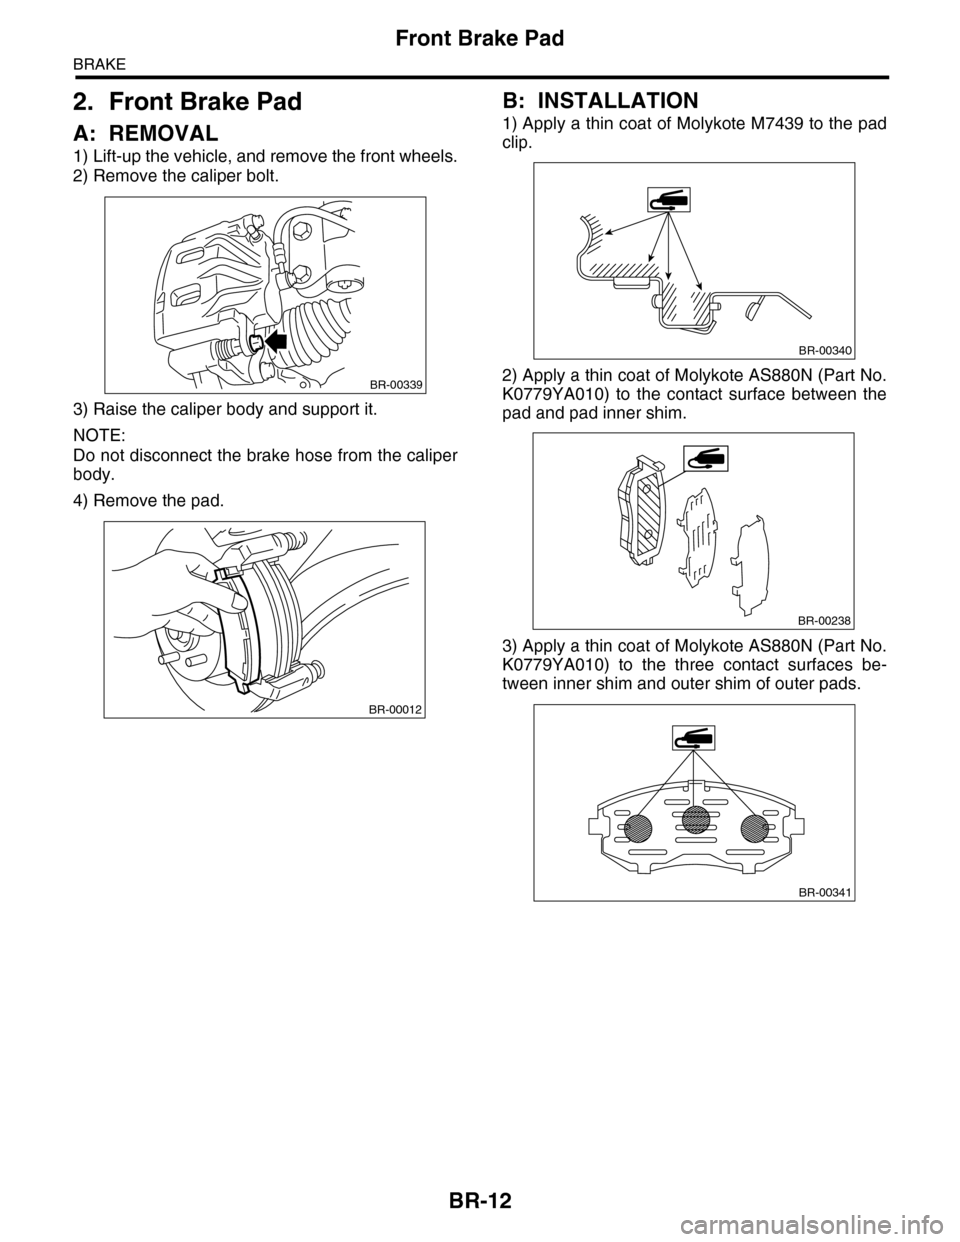 SUBARU TRIBECA 2009 1.G Service Workshop Manual BR-12
Front Brake Pad
BRAKE
2. Front Brake Pad
A: REMOVAL
1) Lift-up the vehicle, and remove the front wheels.
2) Remove the caliper bolt.
3) Raise the caliper body and support it.
NOTE:
Do not discon